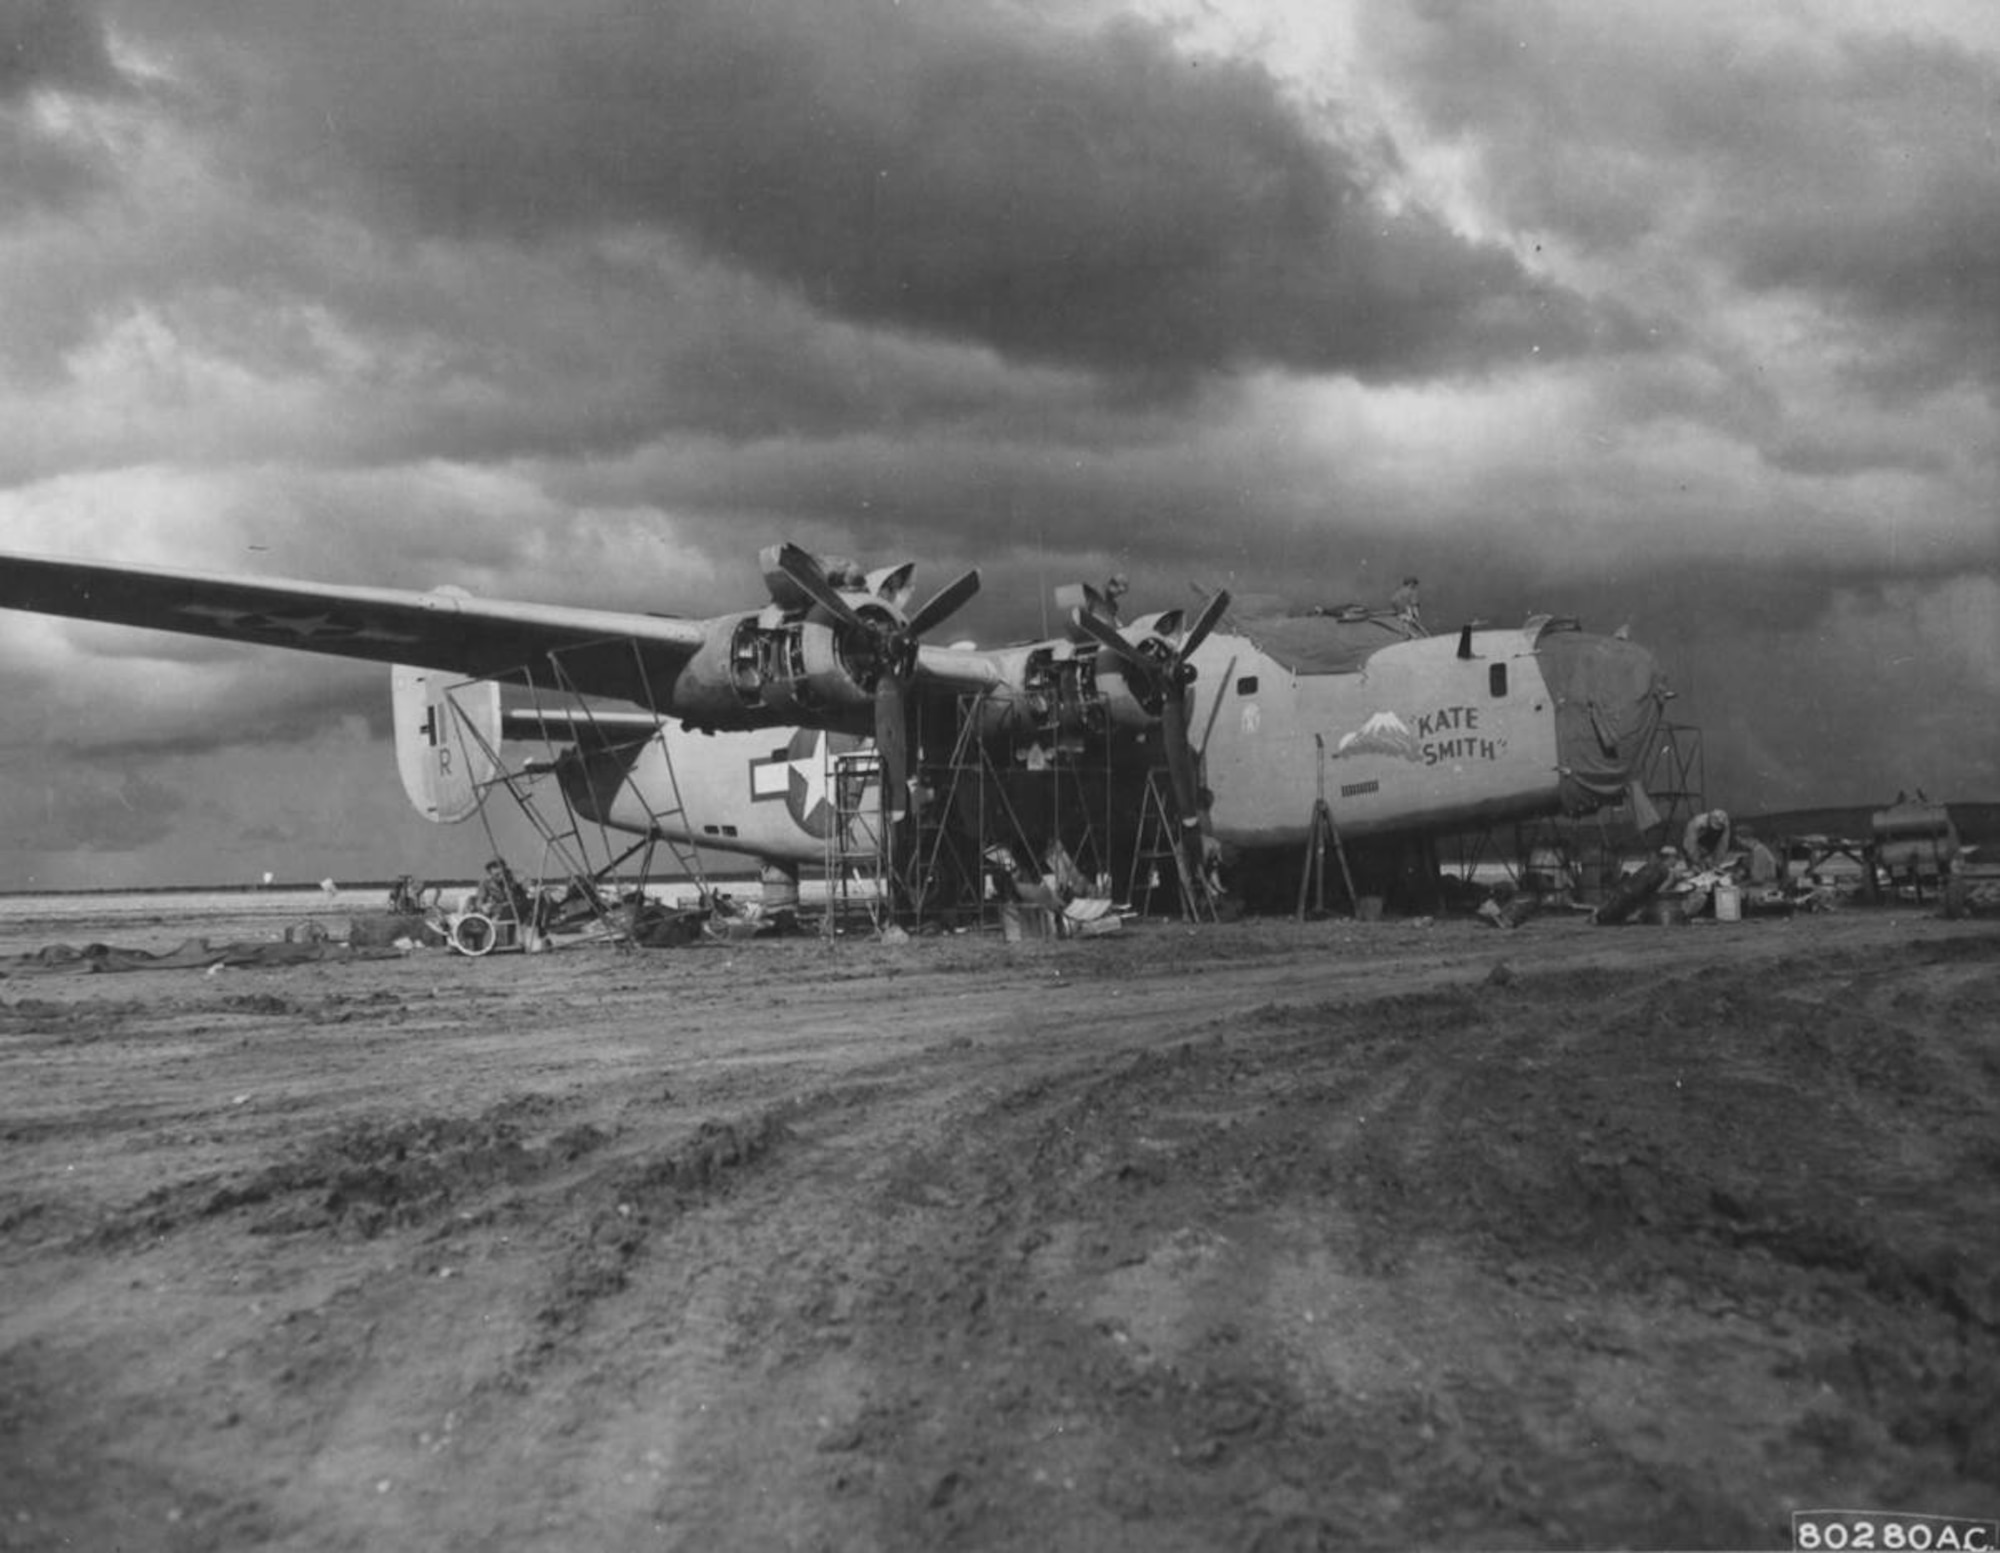 The 43rd Service Group found itself a long way from Portland, Oregon as World War II transpired.  Here a Consolidated B-24D-85-CO Liberator heavy bomber, serial number 42-40654, “KATE SMITH” of the 345th Bombardment Squadron, 98th Bomb Group, is overhauled by men of the 43rd Service Group at an airfield near Benghazi, Cyrenaica, Libya, circa the summer of 1943.  (USAAF Photo)